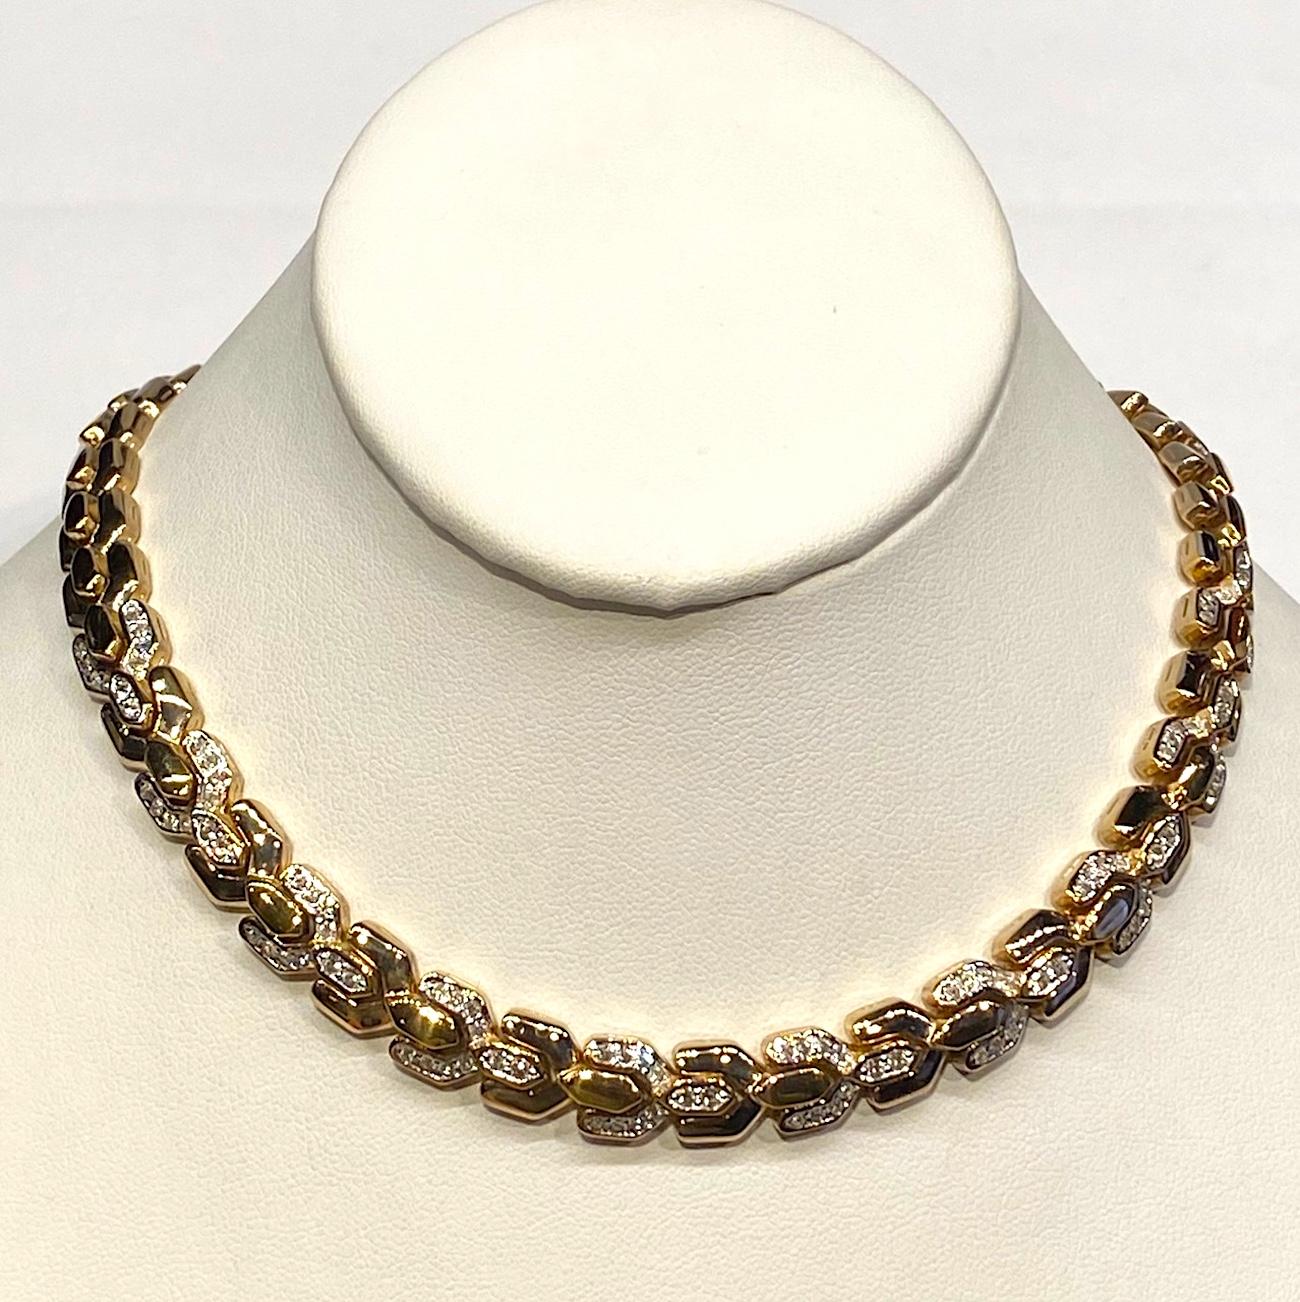 A classic style necklace in gold with rhinestone accent by Panetta circa 1980. The link is unusual in that it is a Y shape turned on its side to interlock with the ones before and after. The necklace has a wearable length of 15.5 inches in length